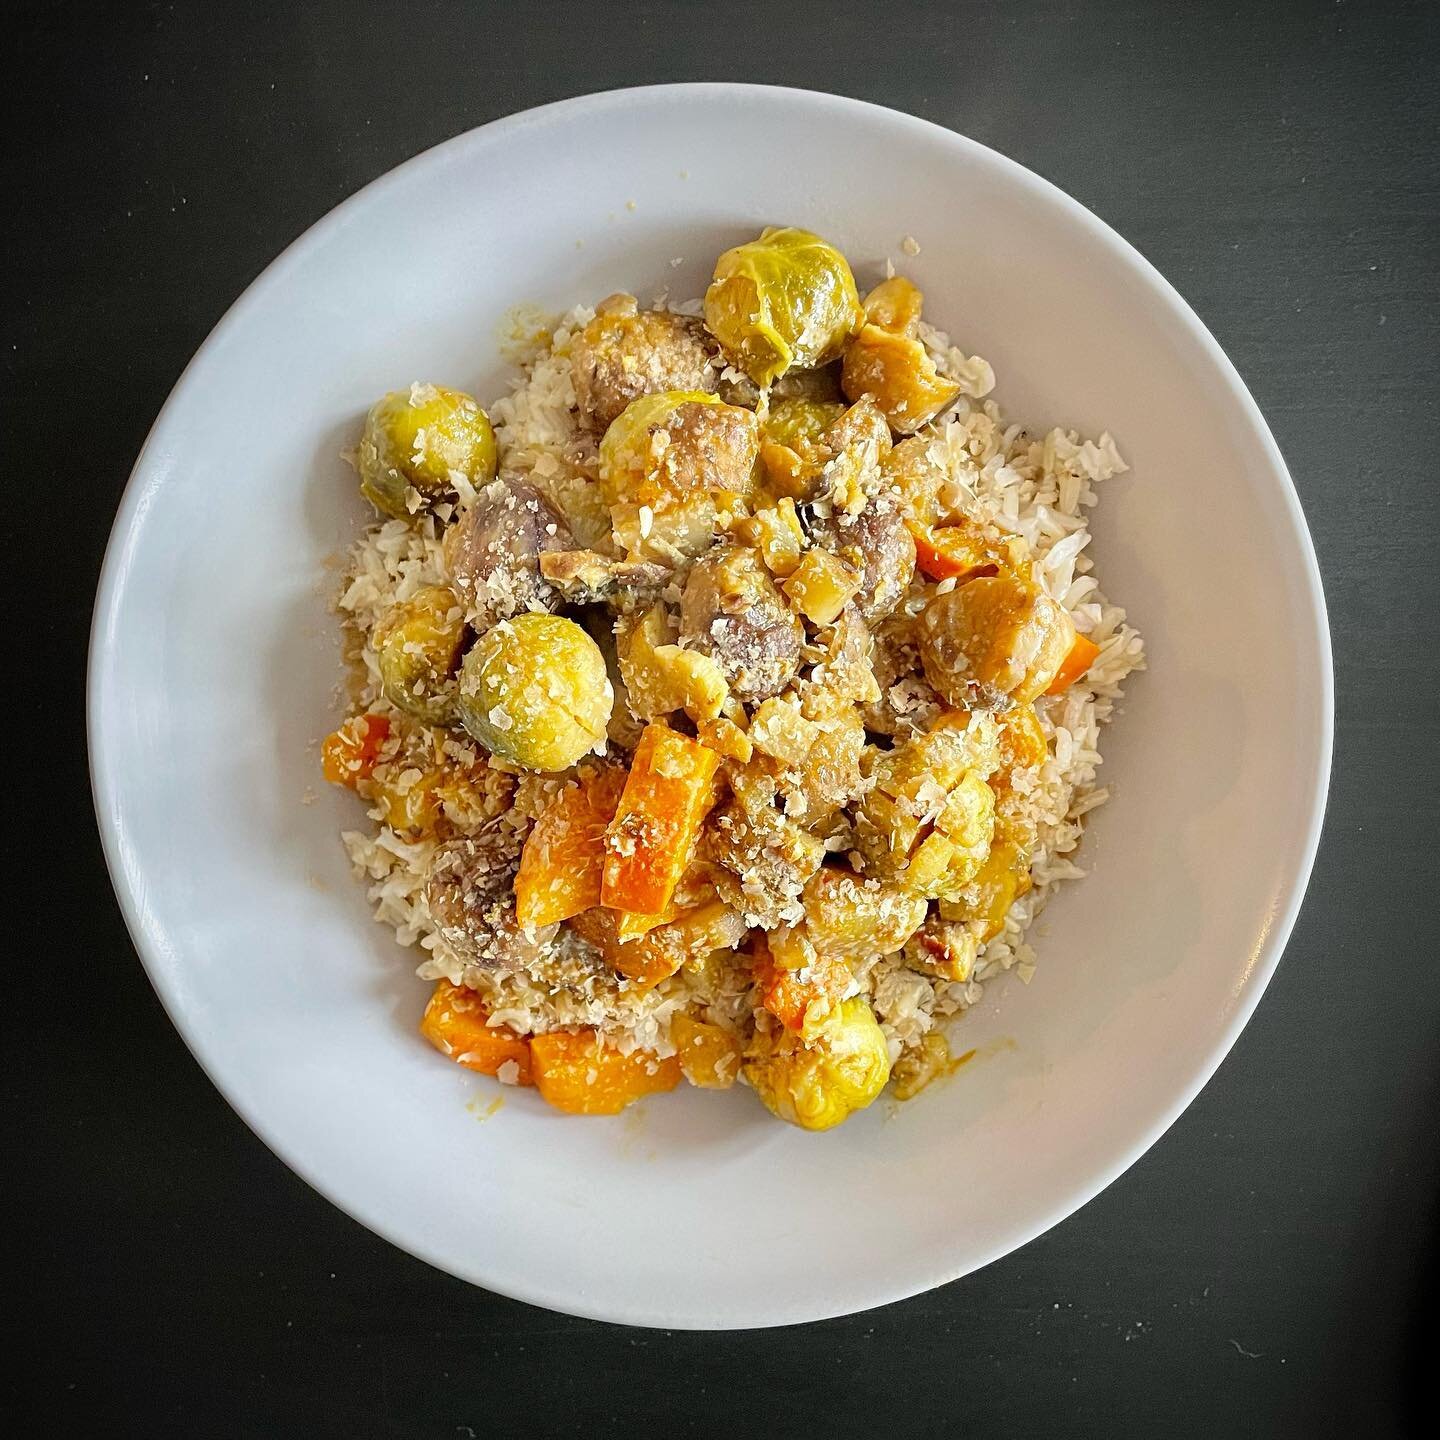 Brussels sprouts, pumpkin, mushrooms, chestnuts, and Jerusalem artichokes, in chili and coconut milk sauce with a dash of nutritional yeast on top, cuddled on full grain rice.

#veganberlin #veganhardships #vegancooking #homecooking #seasonal #local